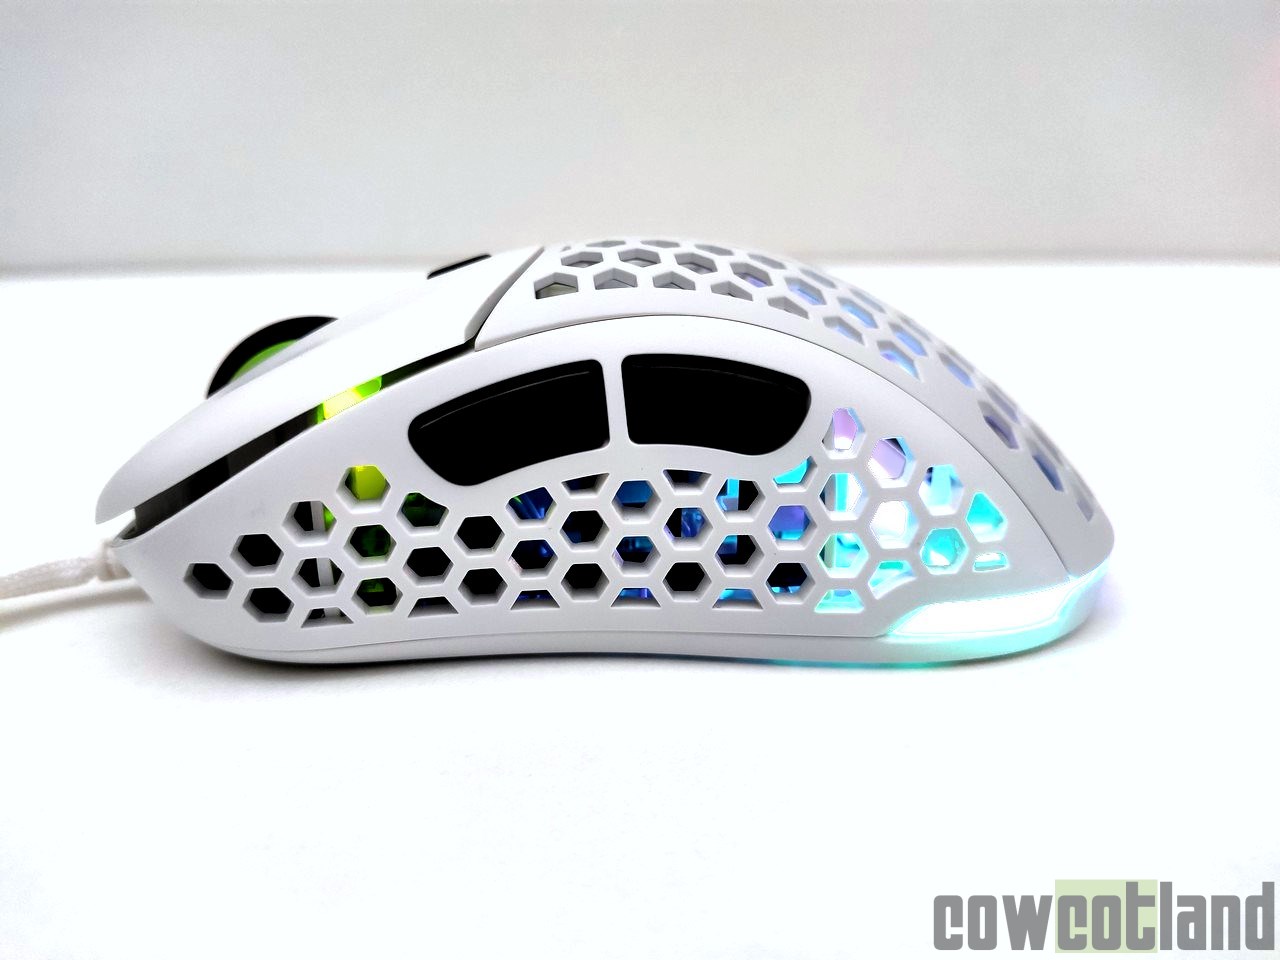 Image 43510, galerie Test souris Gaming Sharkoon Light 200 : Zowie-Killer ?